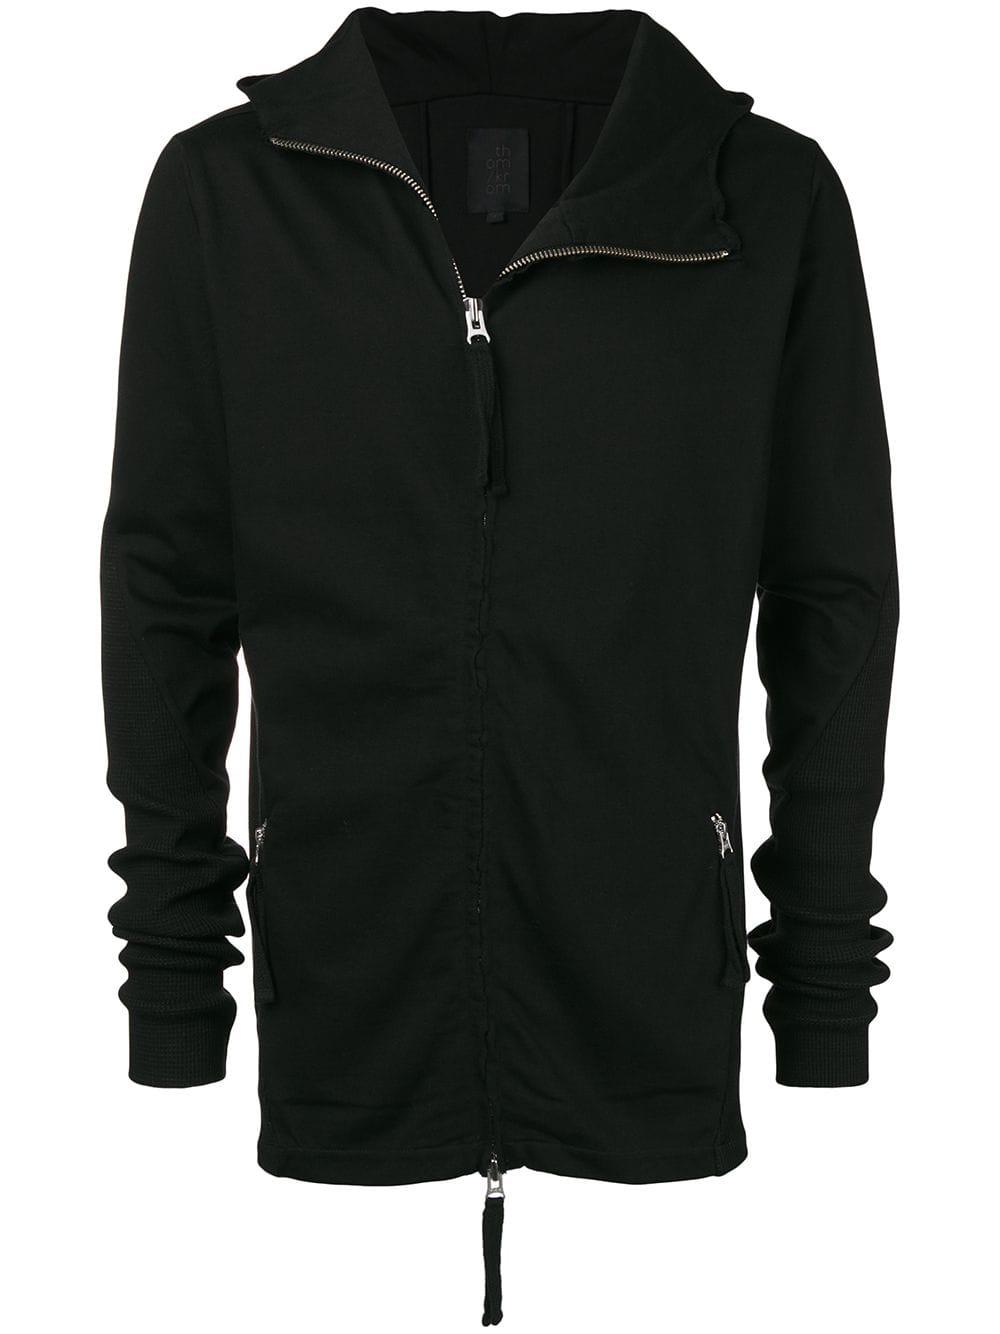 Thom Krom Cotton Zipped Hooded Jacket in Black for Men - Lyst